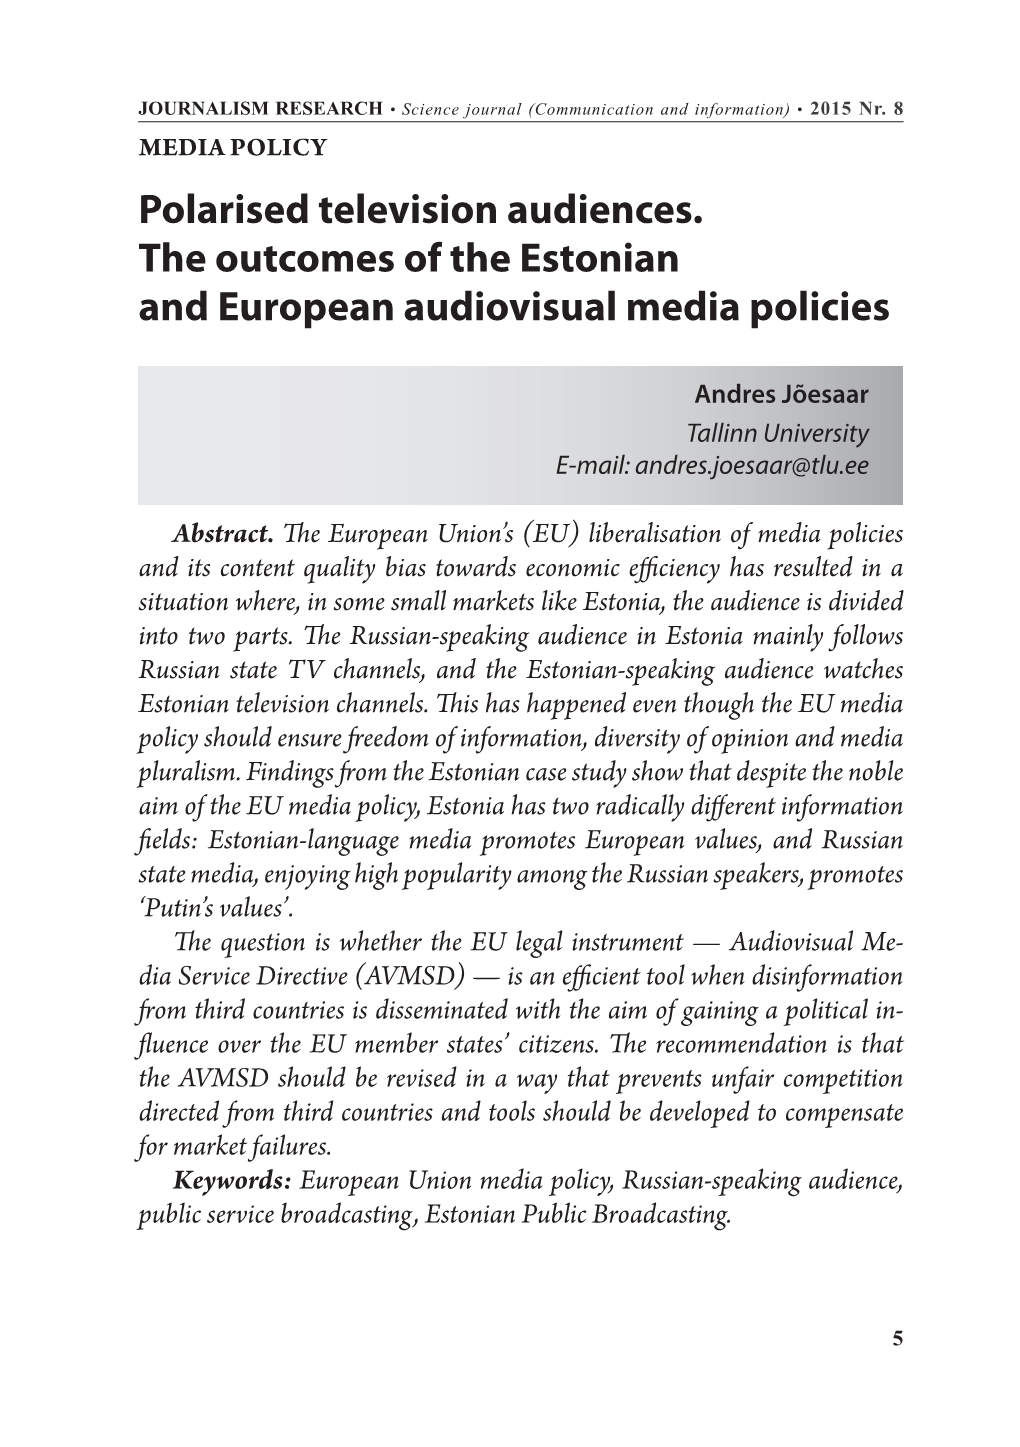 Polarised Television Audiences. the Outcomes of the Estonian and European Audiovisual Media Policies